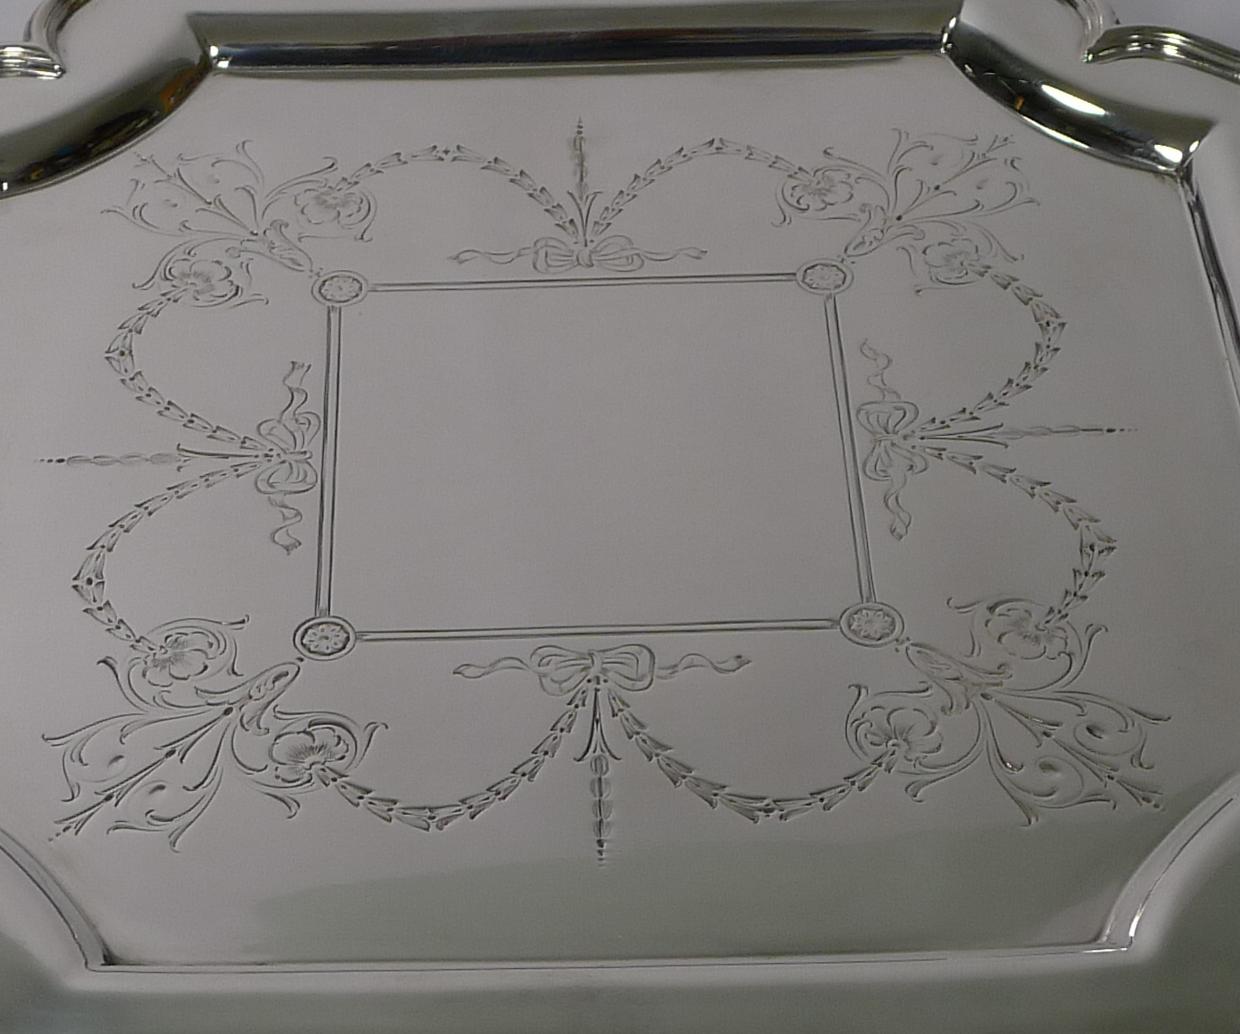 Early 20th Century Antique English Silver Plated Salver / Tray by Roberts & Belk